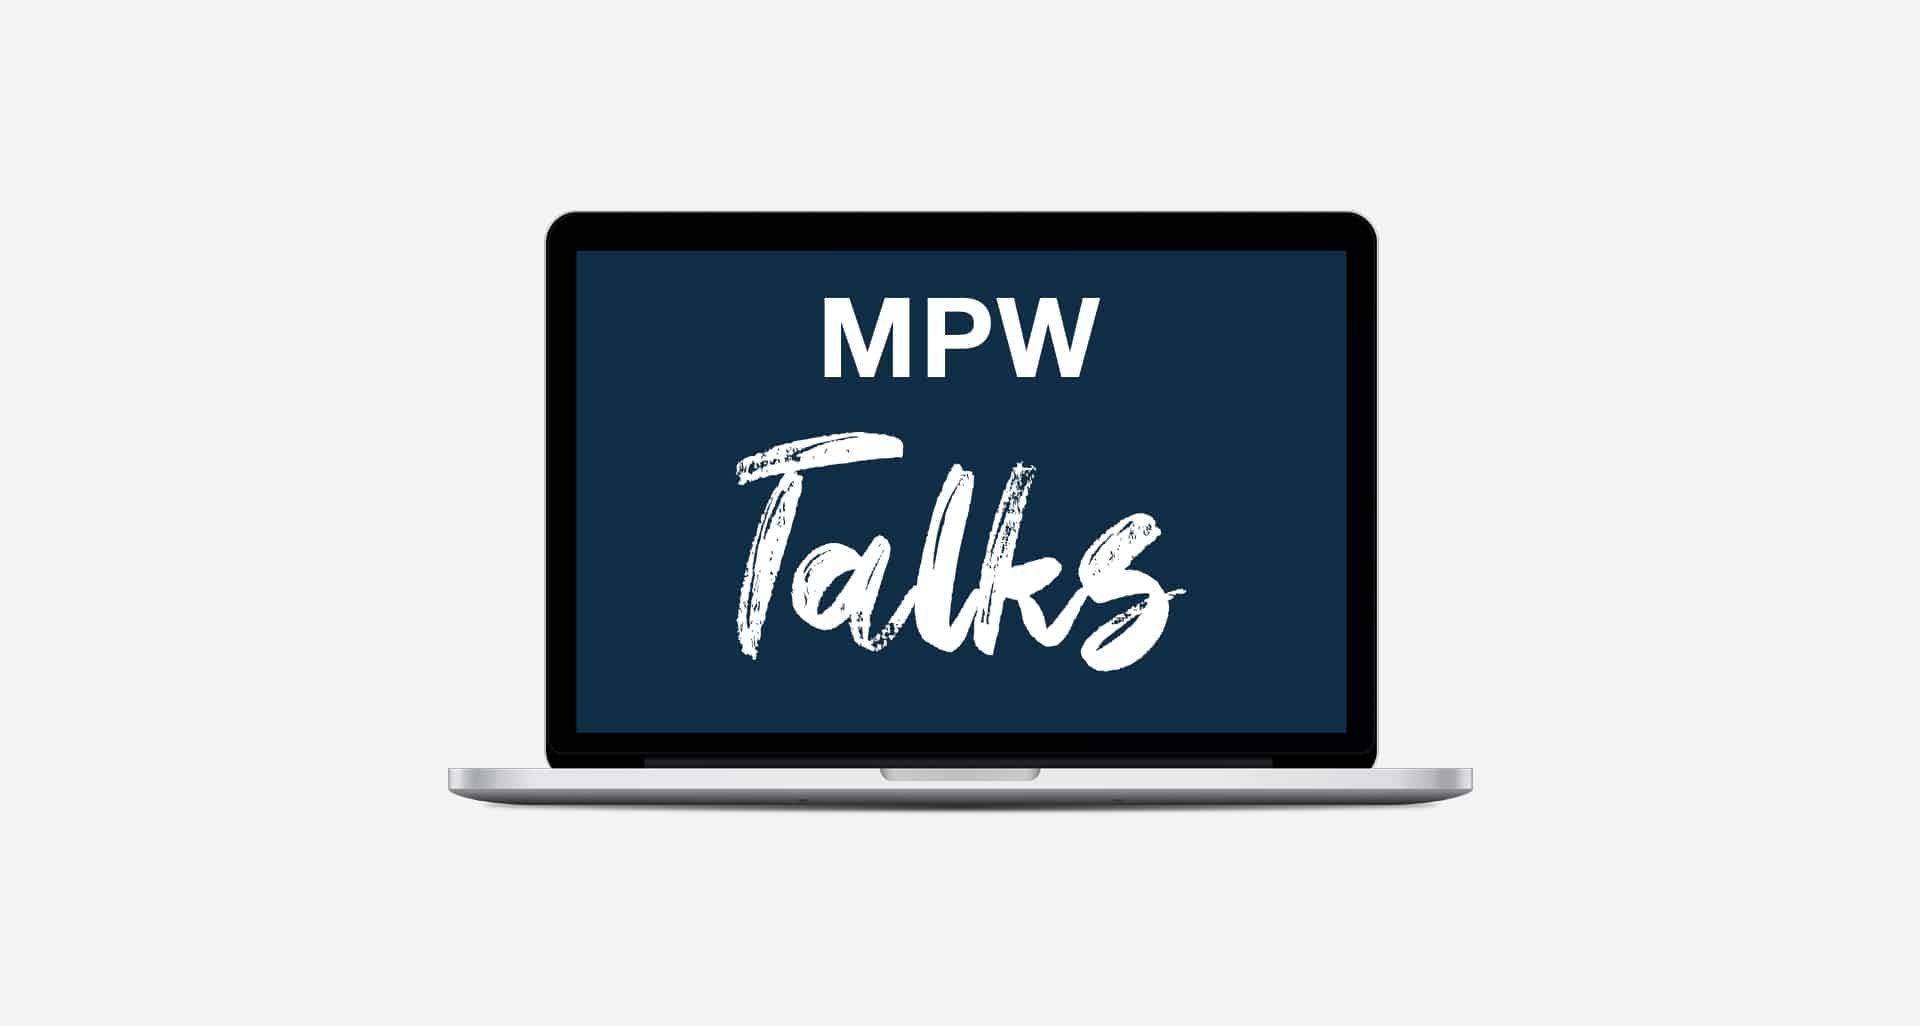 Join us for our new online series, MPW Talks